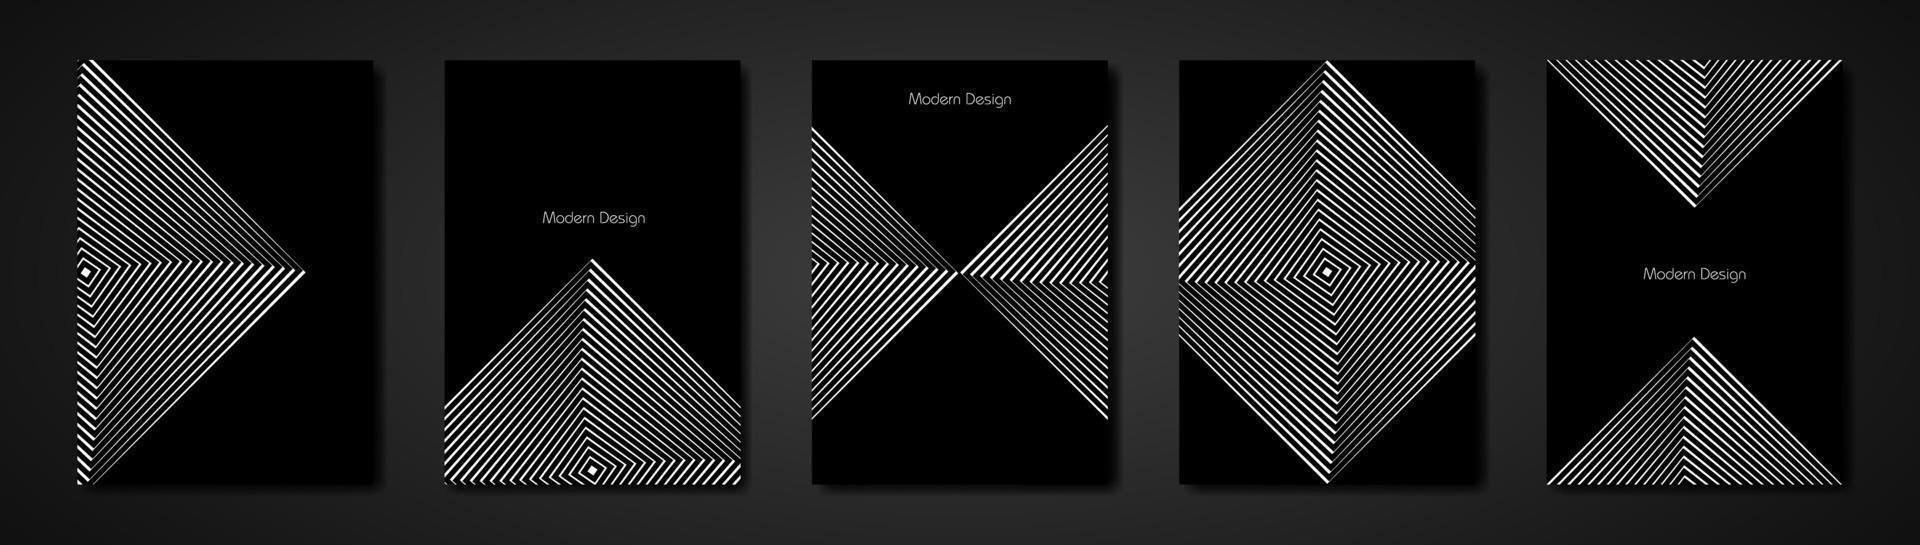 Minimal covers set. Future geometric design. Op Art squares in black an white with diagonal lines making an optical illusion of pyramids or tunnel, copy space on black background vector